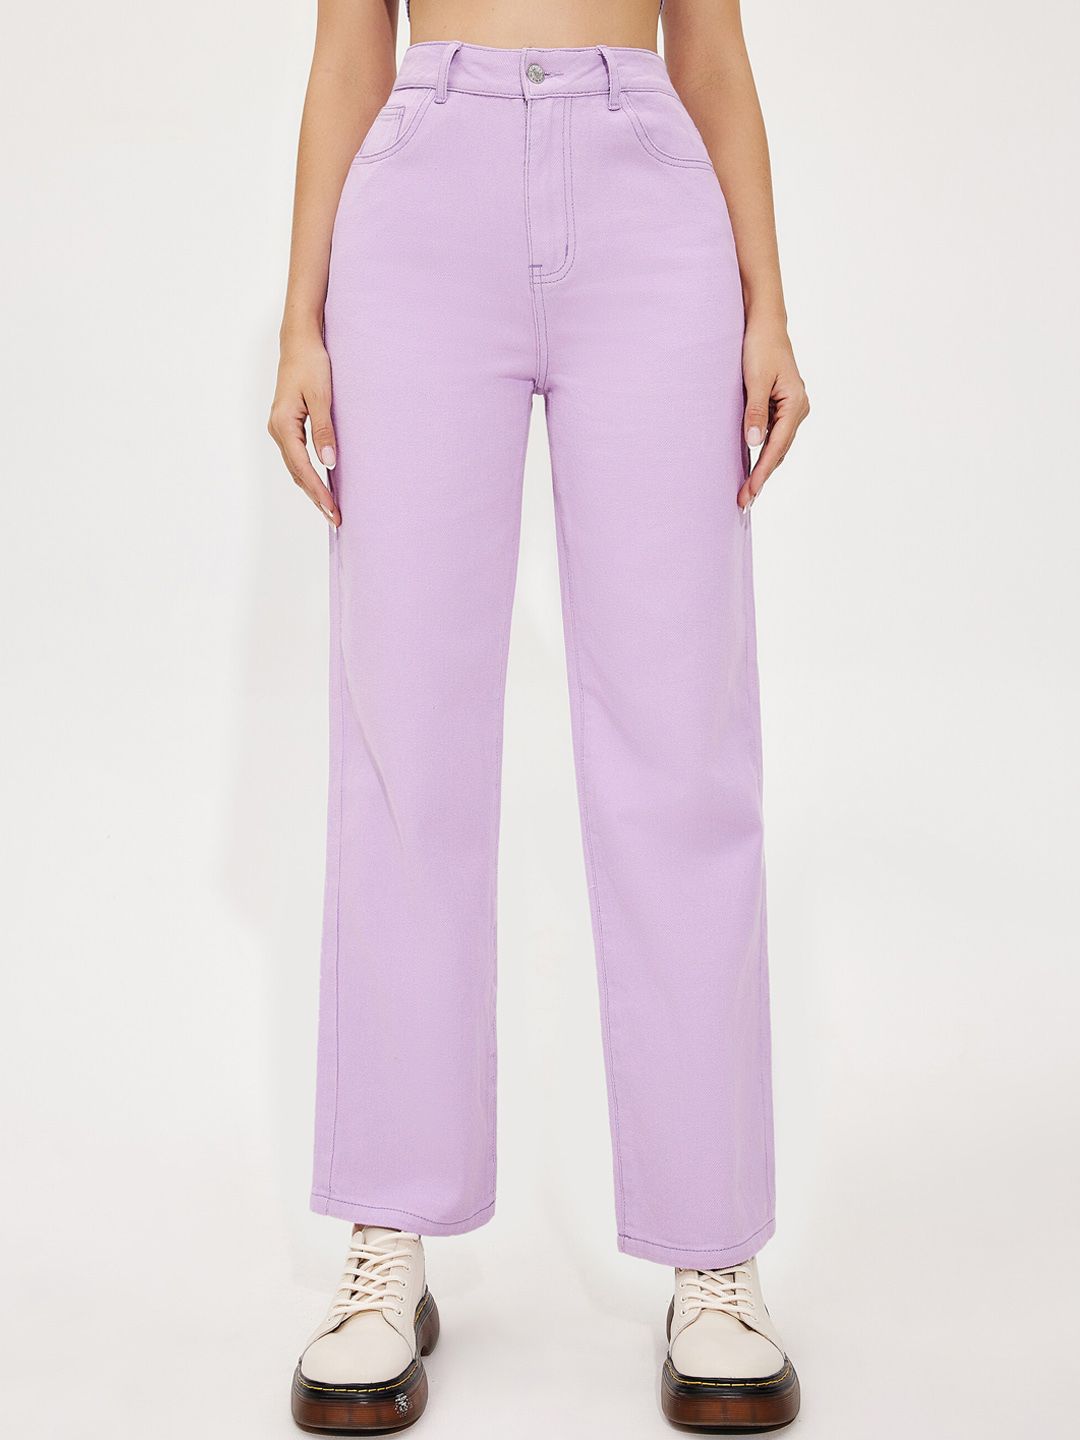 URBANIC Women Purple Relaxed Fit Jeans Price in India